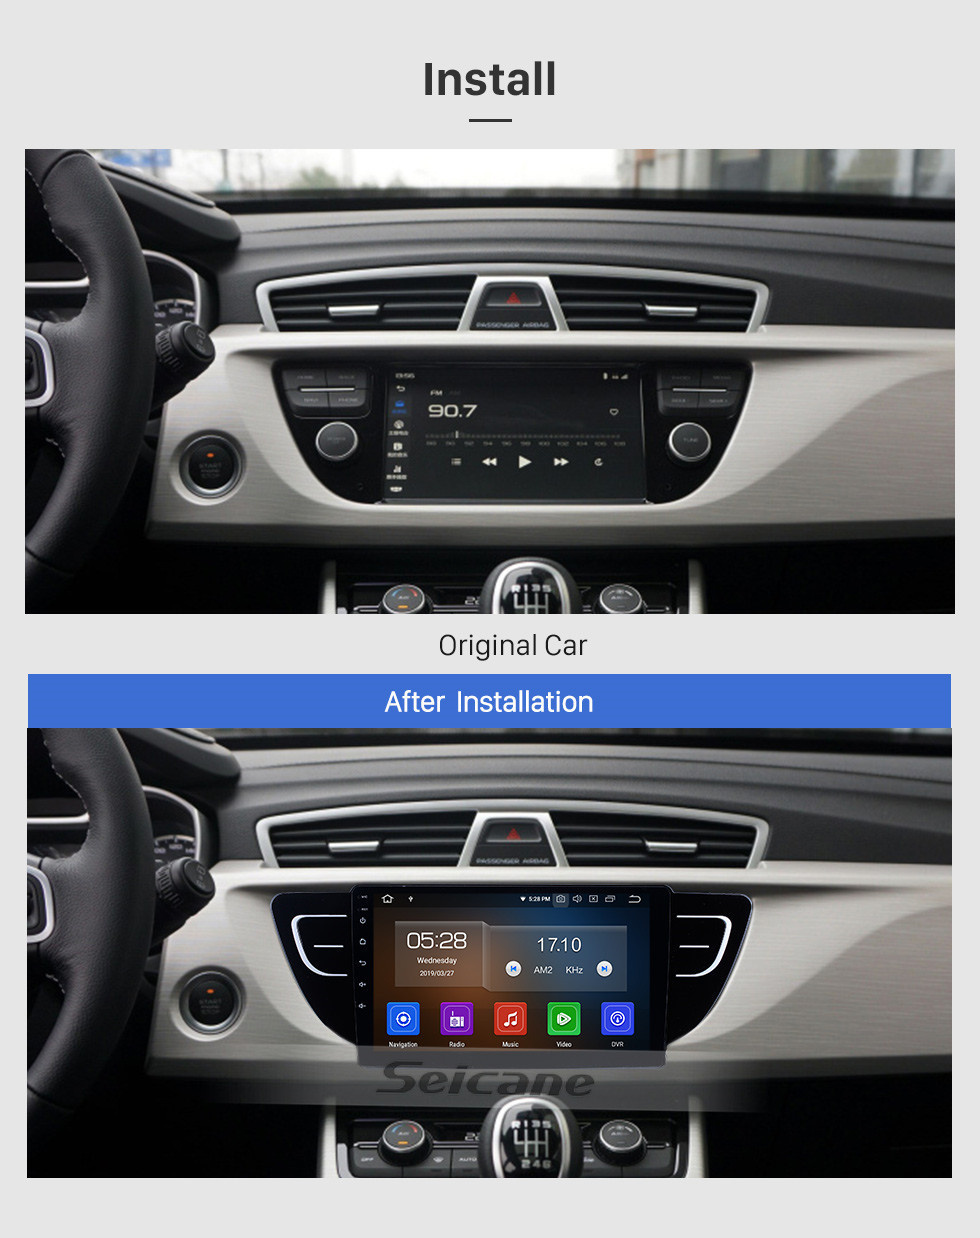 Seicane HD Touchscreen for 2016 2017 2018 Geely Boyue Radio Android 12.0 9 inch GPS Navigation Bluetooth WIFI Carplay support DVR DAB+